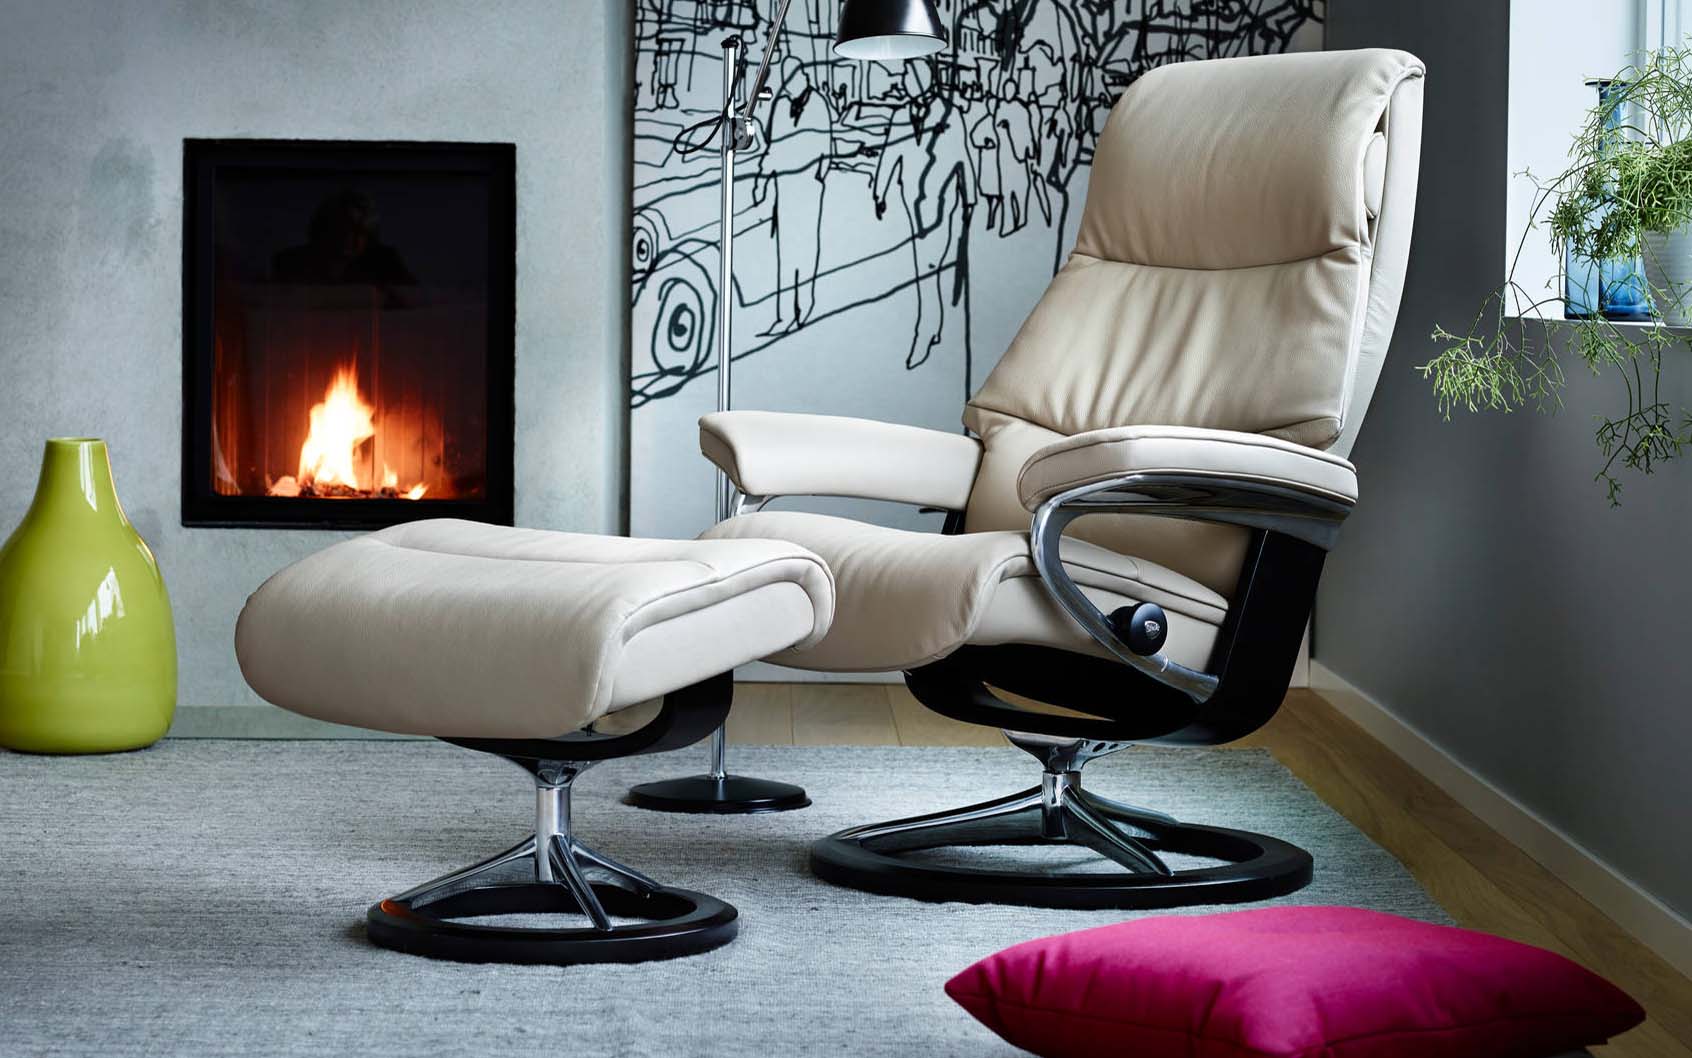 Stressless View – SL Recliners